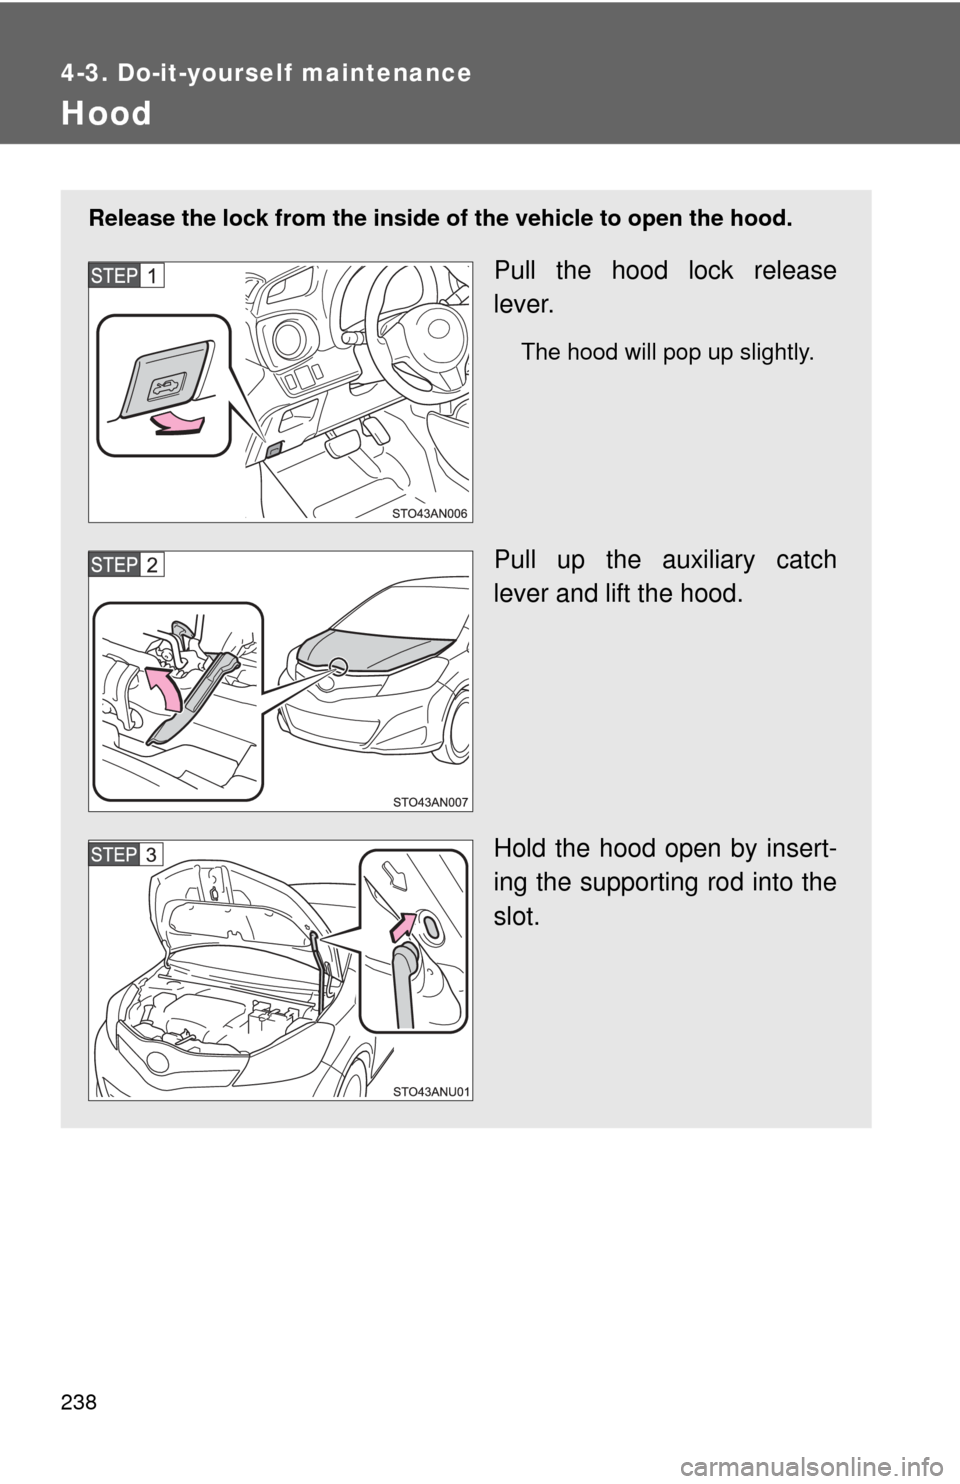 TOYOTA YARIS 2013 3.G Owners Manual 238
4-3. Do-it-yourself maintenance
Hood
Release the lock from the inside of the vehicle to open the hood.
Pull the hood lock release
lever.
The hood will pop up slightly.
Pull up the auxiliary catch
